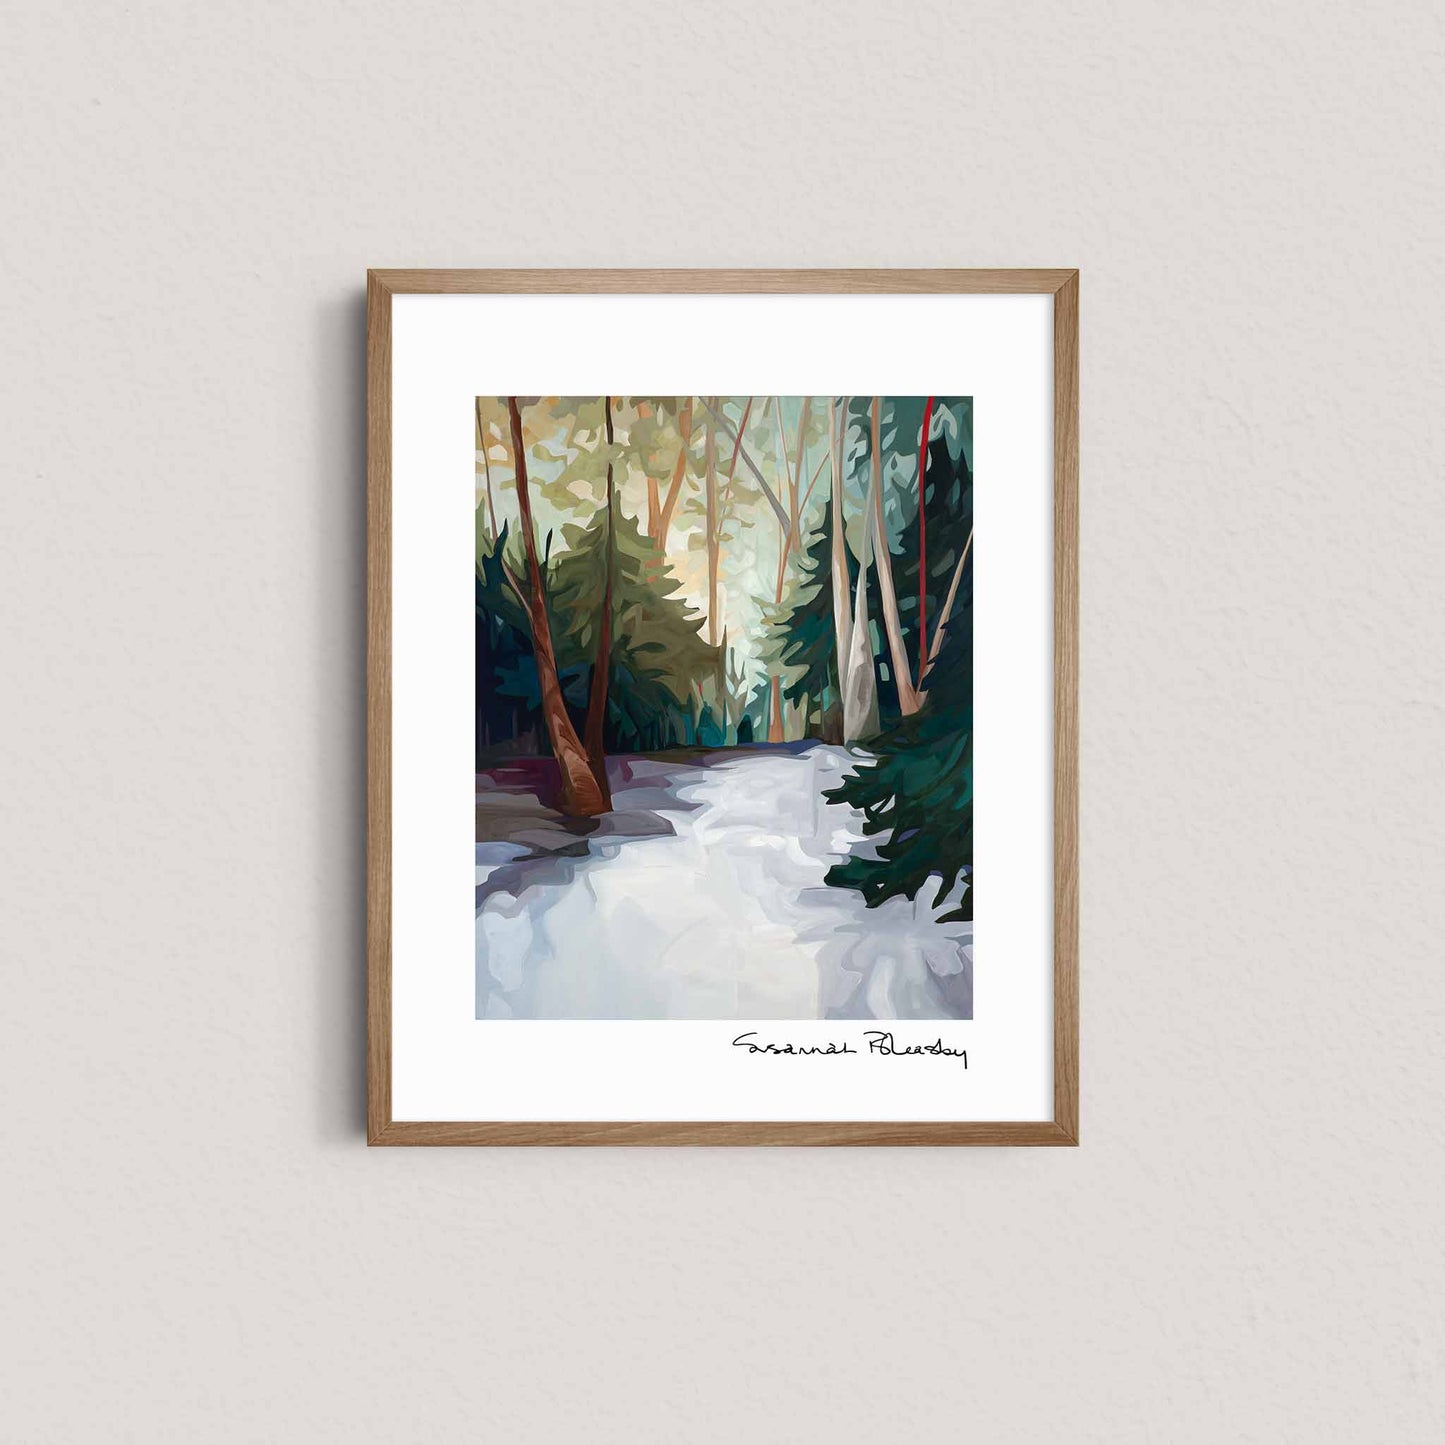 8x10 art print of abstract forest landscape painting print by Canadian artist Susannah Bleasby